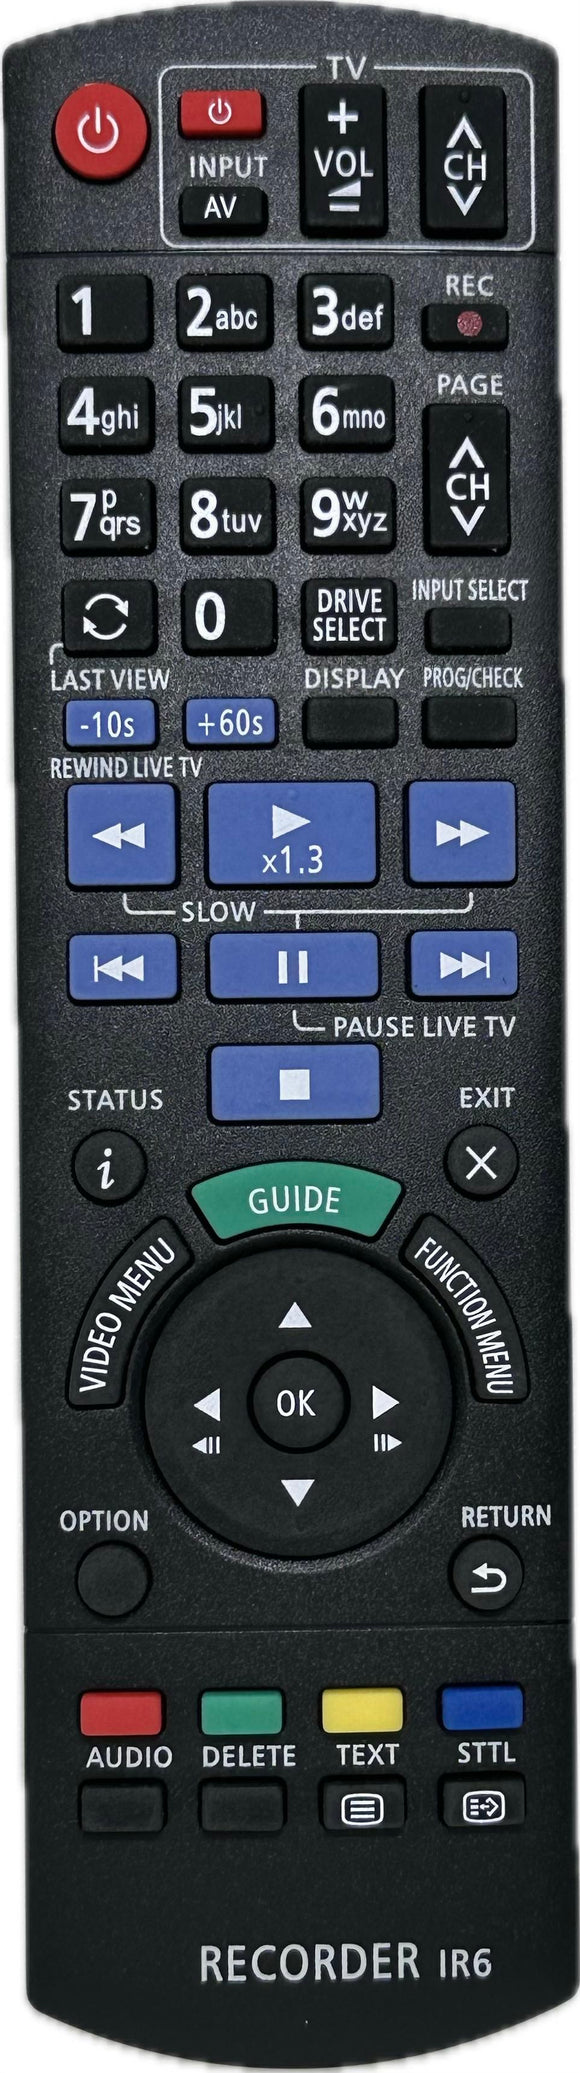 Replacement Panasonic Remote Control N2QAYB001077 -DMRHWT260 DMRPWT560 NEW